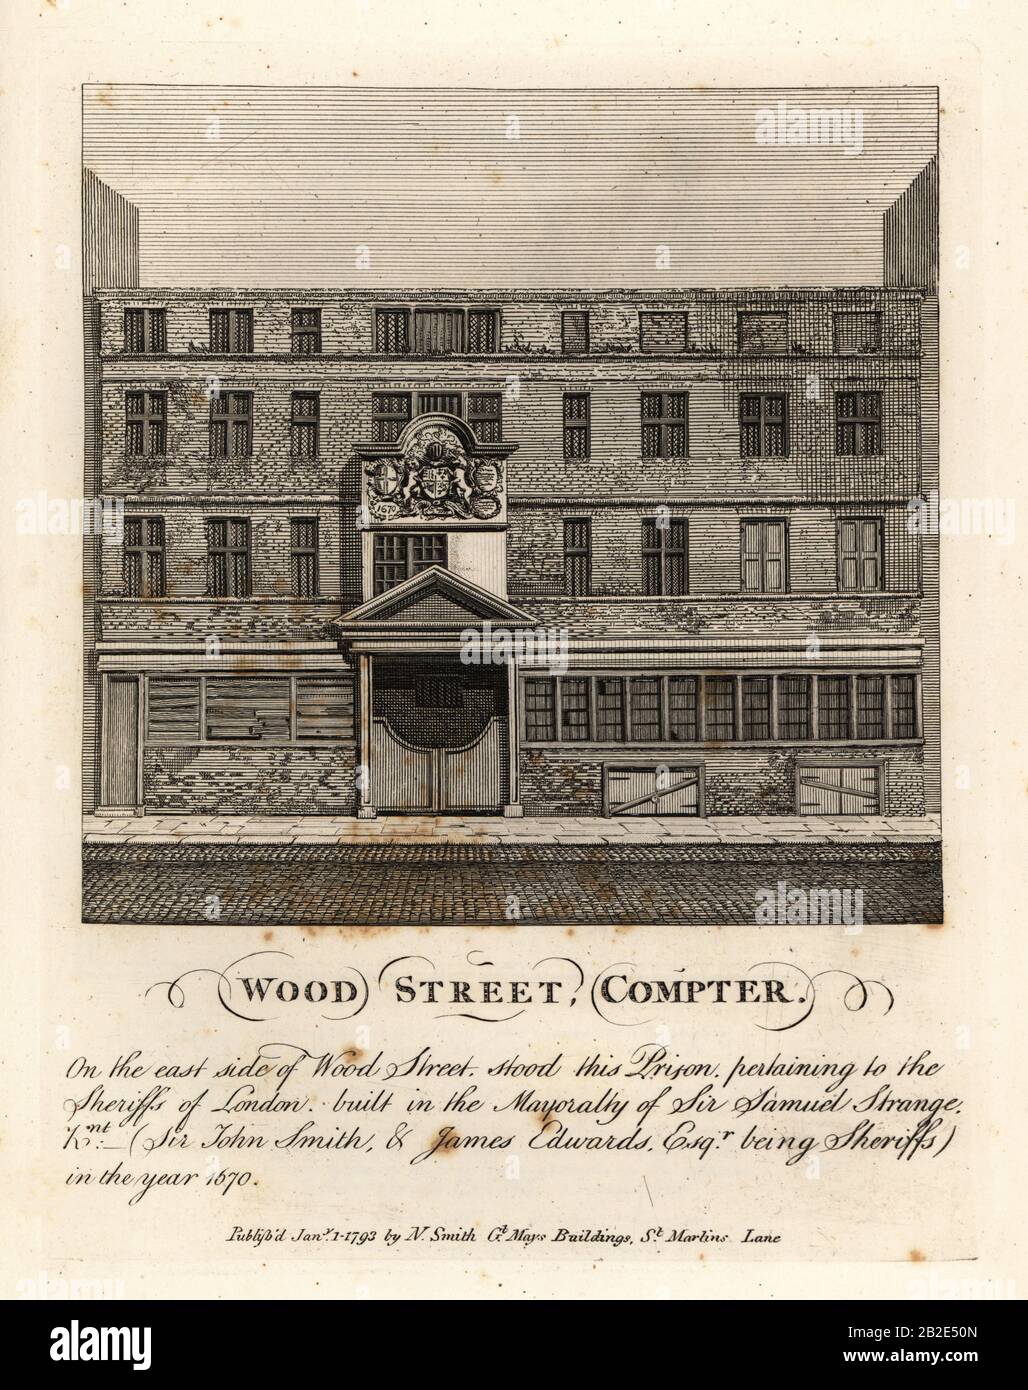 Wood Street Compter, prison owned by the Sheriffs of London, built in the mayoralty of Sir Samuel Strange in 1670. Copperplate engraving by John Thomas Smith after original drawings by members of the Society of Antiquaries from his J.T. Smith’s Antiquities of London and its Environs, J. Sewell, R. Folder, J. Simco, London, 1793. Stock Photo